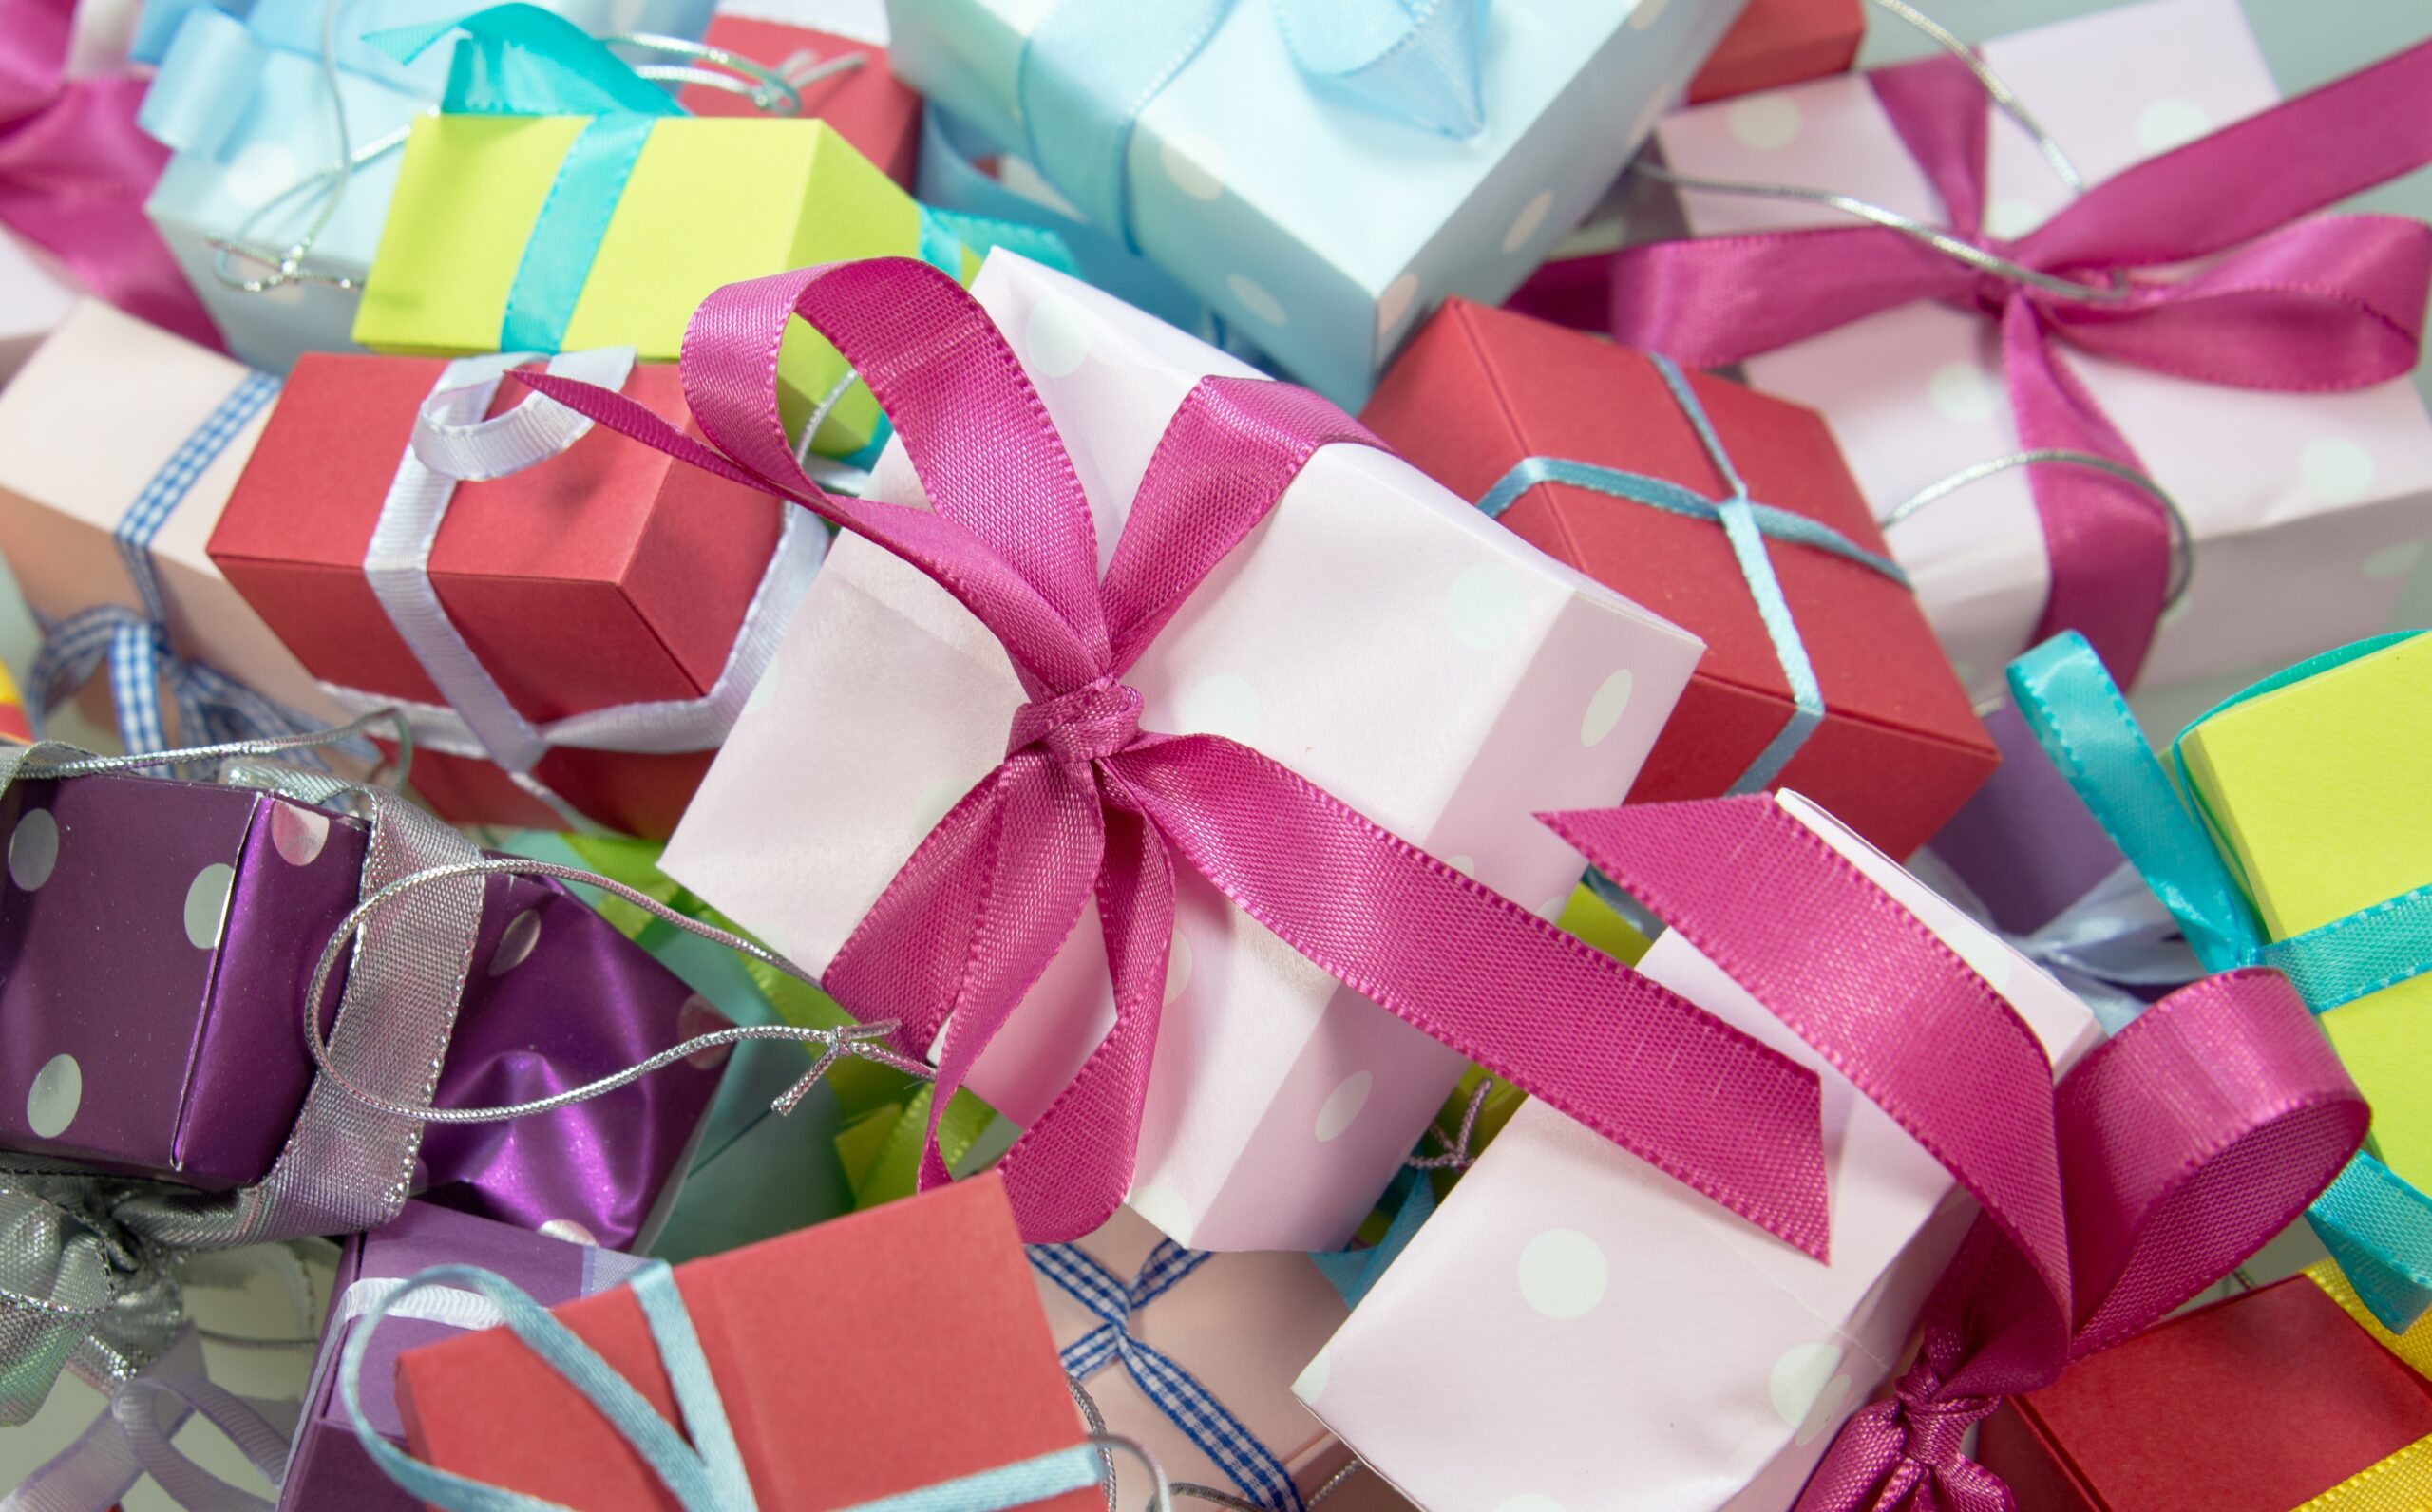 Assorted-colored Gift Boxes